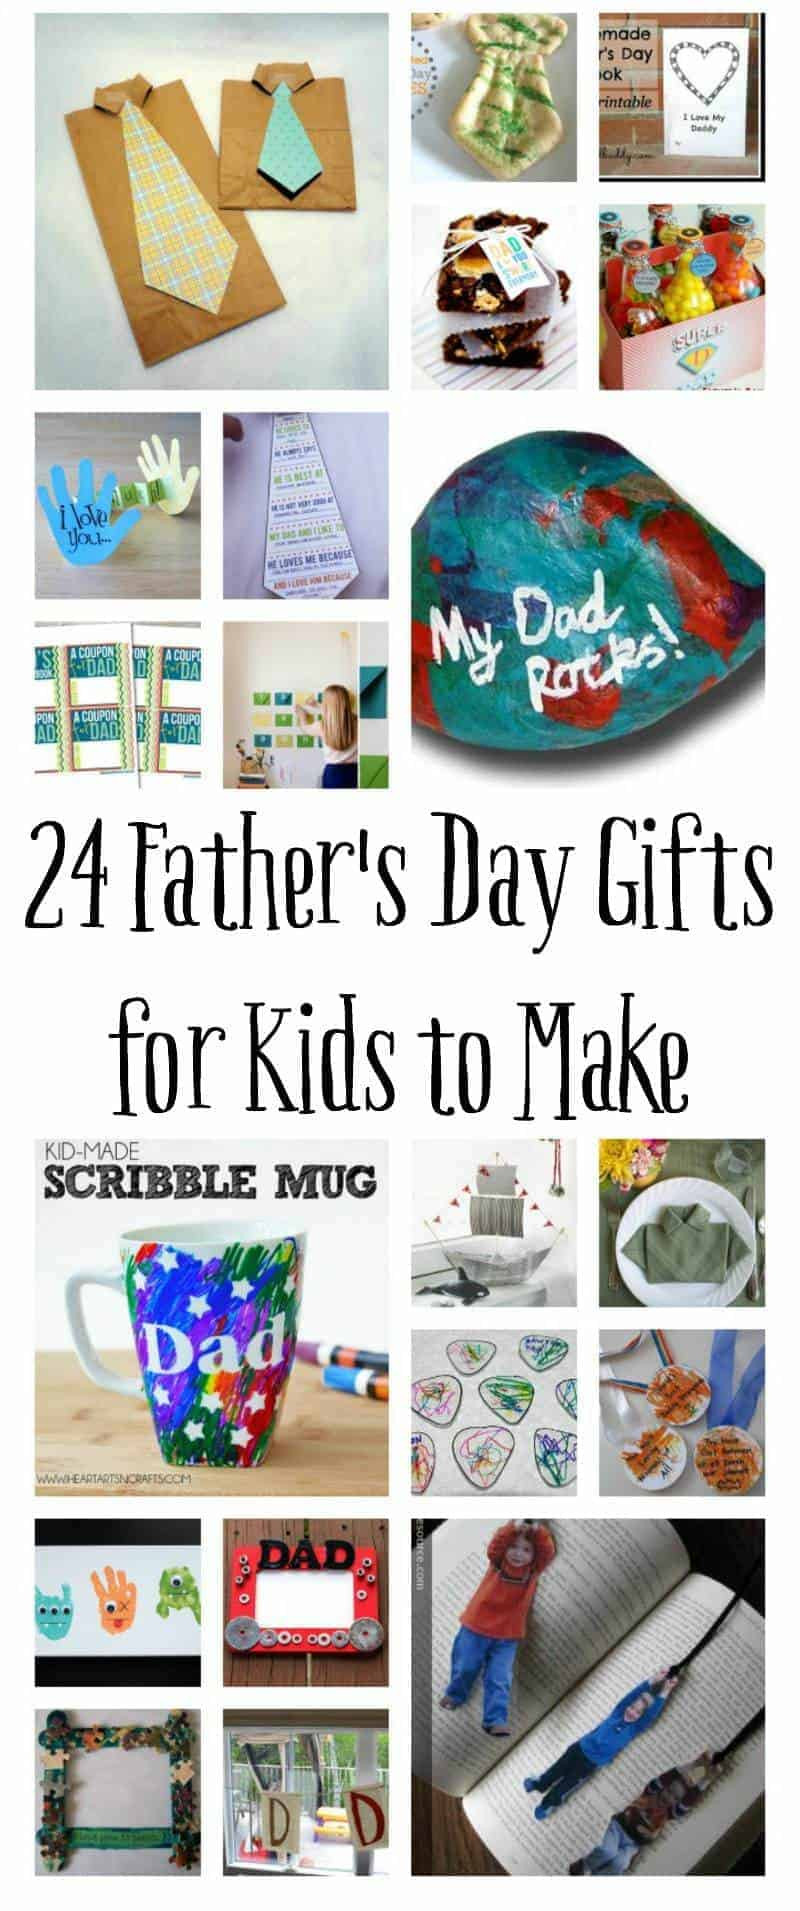 Fathers Day Gift Ideas For Kids To Make
 Homemade Father s Day Gifts for Kids to Make